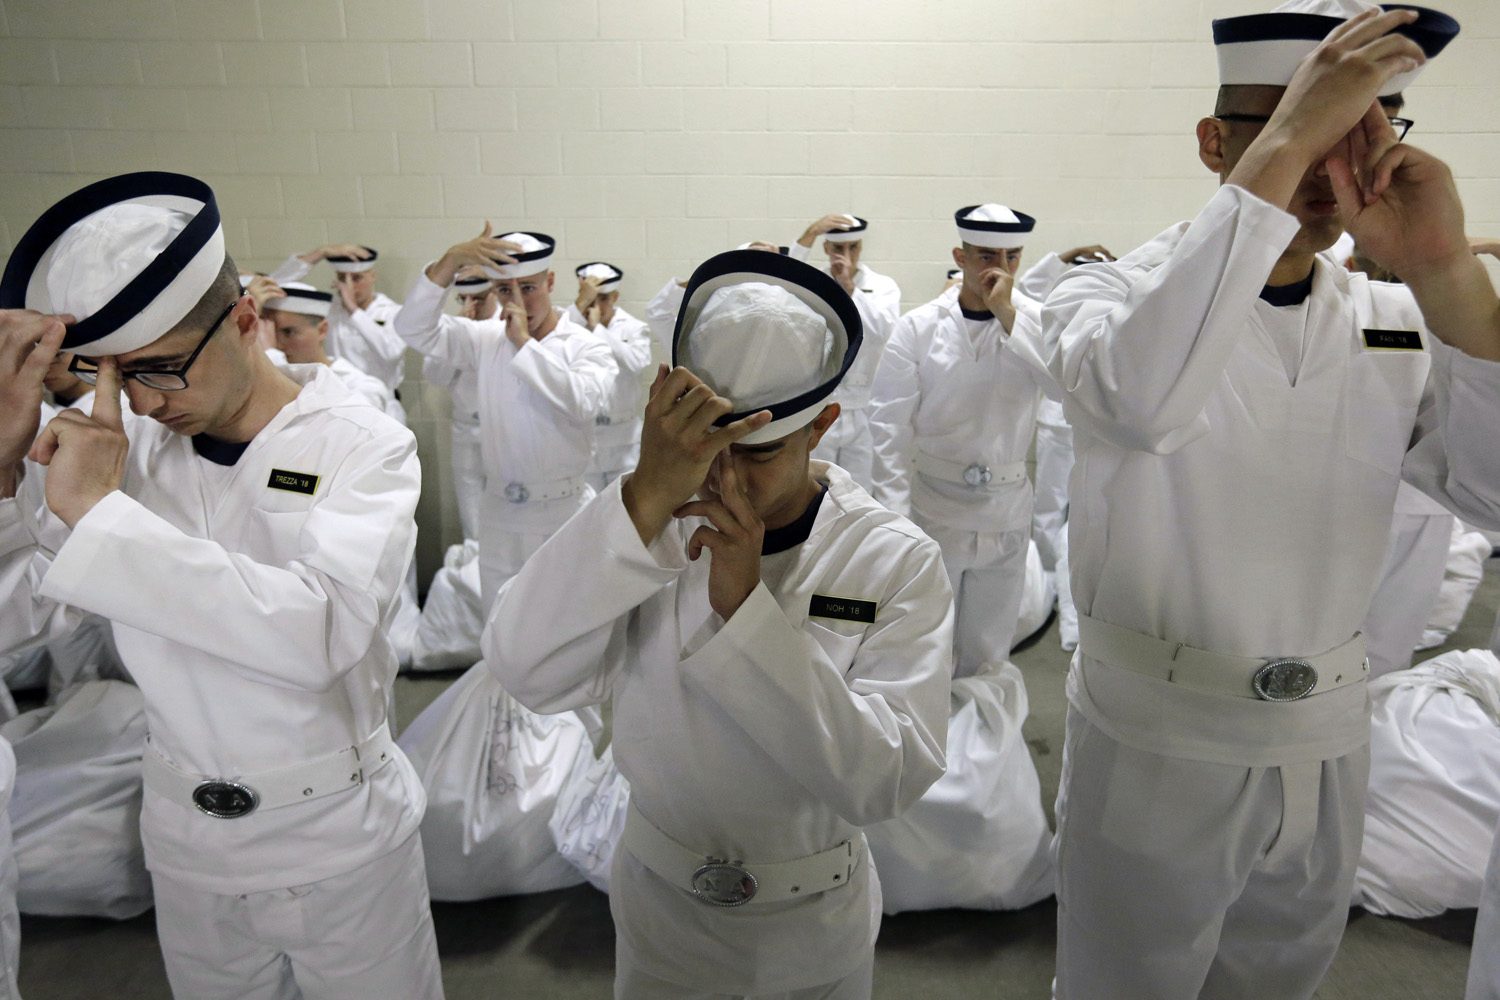 Jul. 1, 2014. Prospective plebes learn how to properly wear their covers during Induction Day at the U.S. Naval Academy in Annapolis, Md.